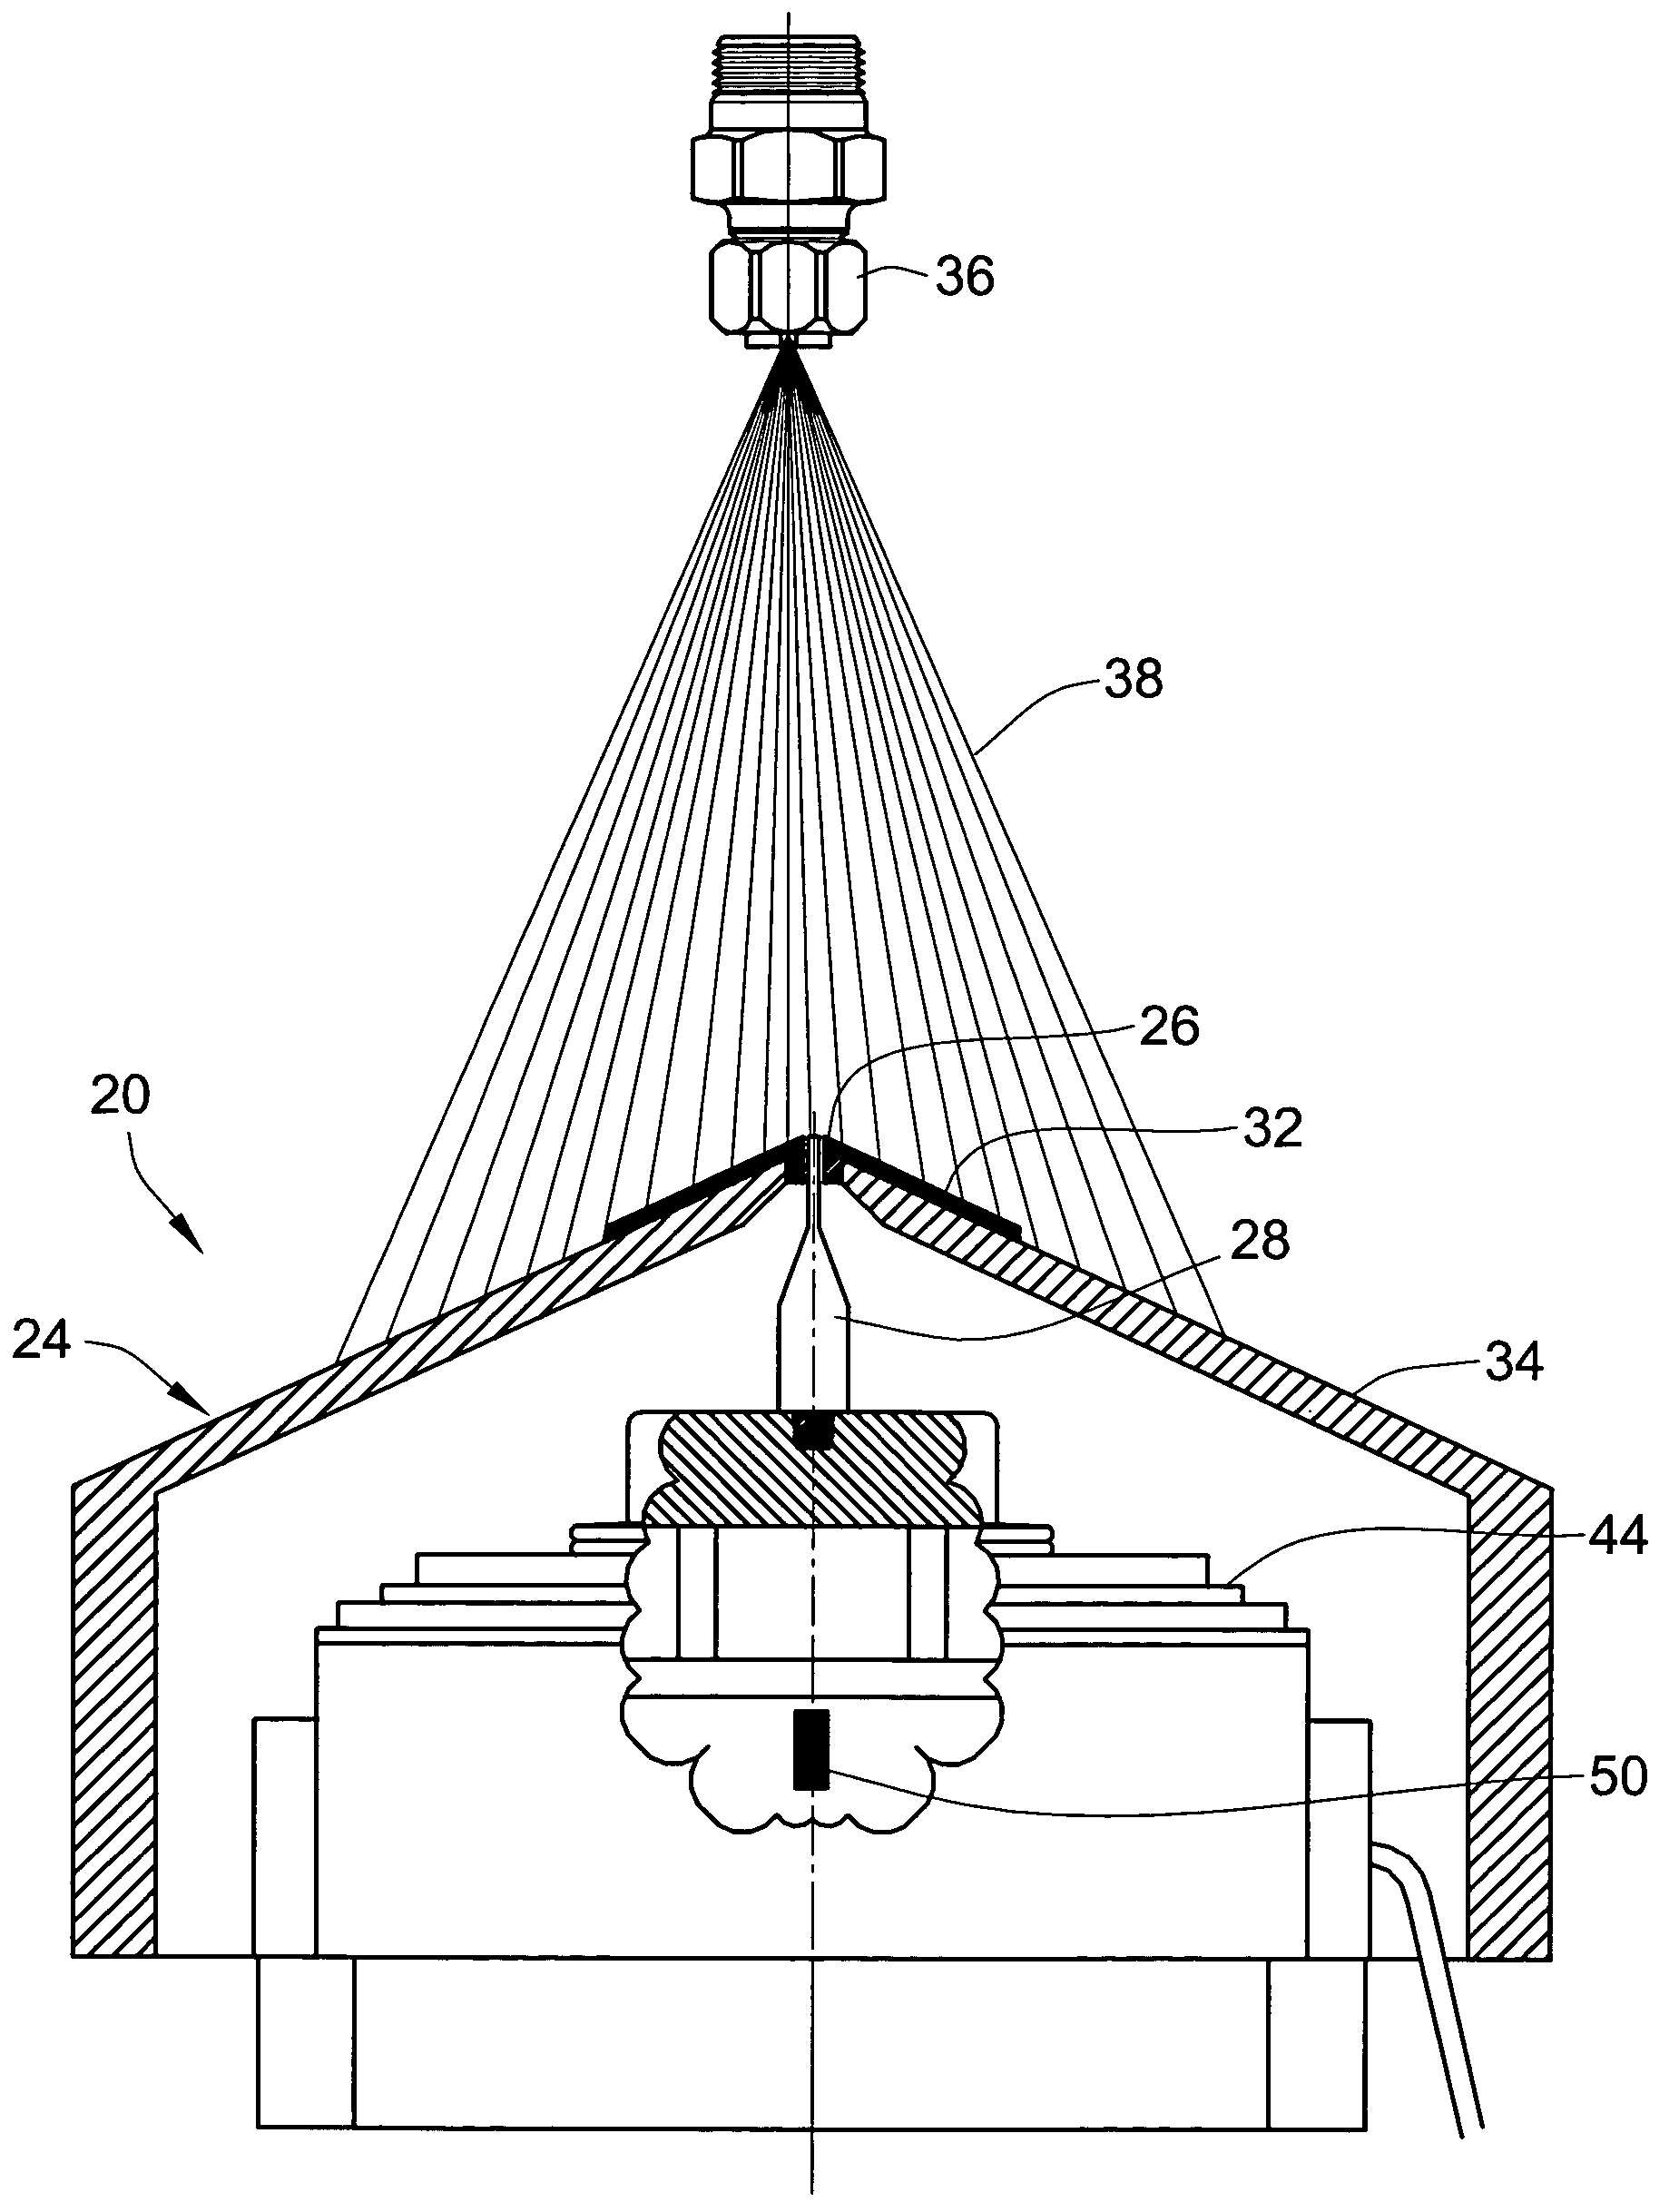 Apparatus and method for measuring characteristics of fluid spray patterns